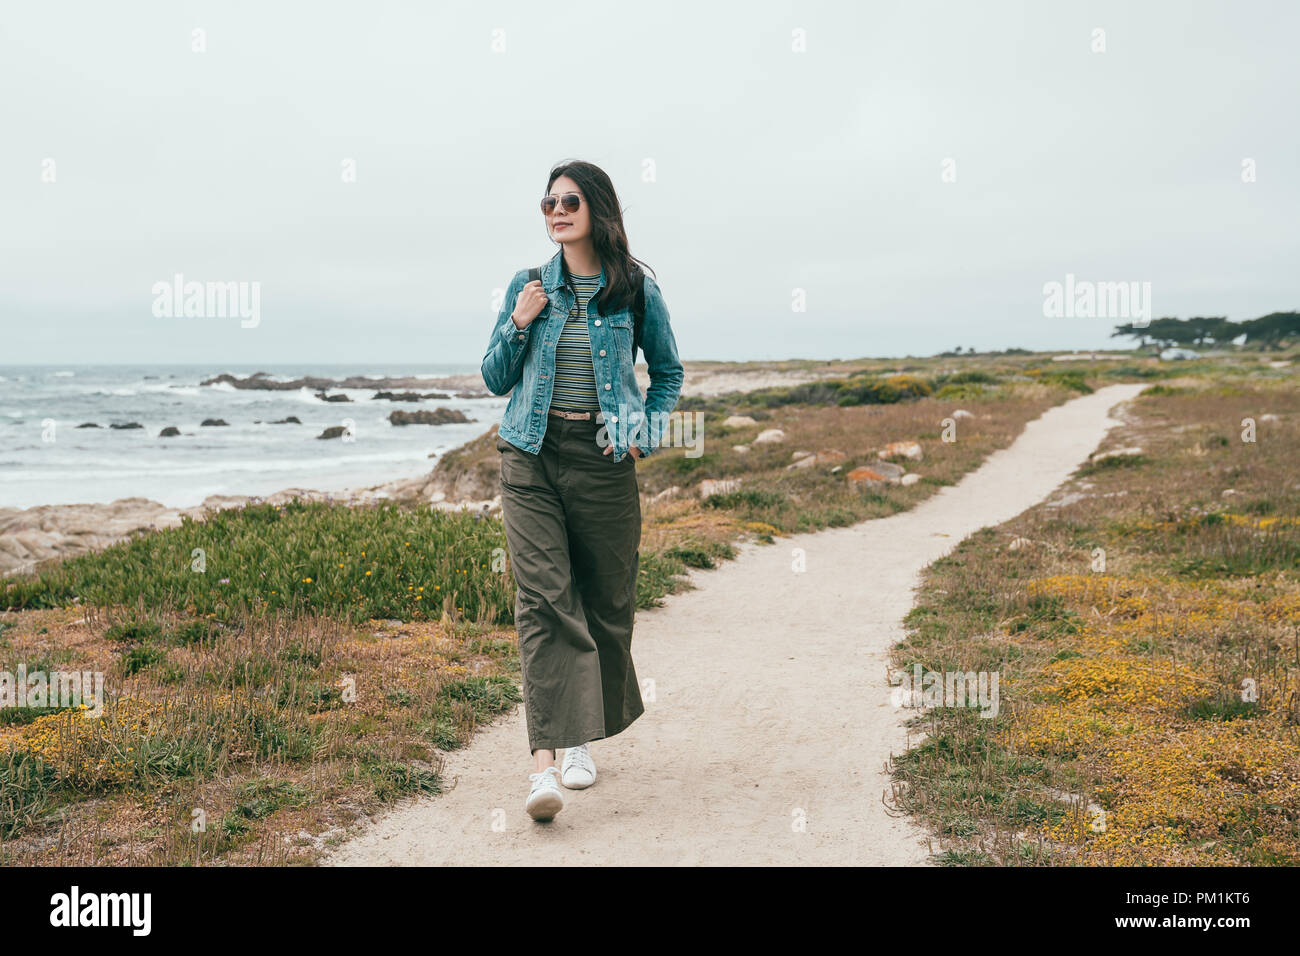 a stylish travel woman walking in a beach path and feeling satisfied by this peaceful place. Stock Photo